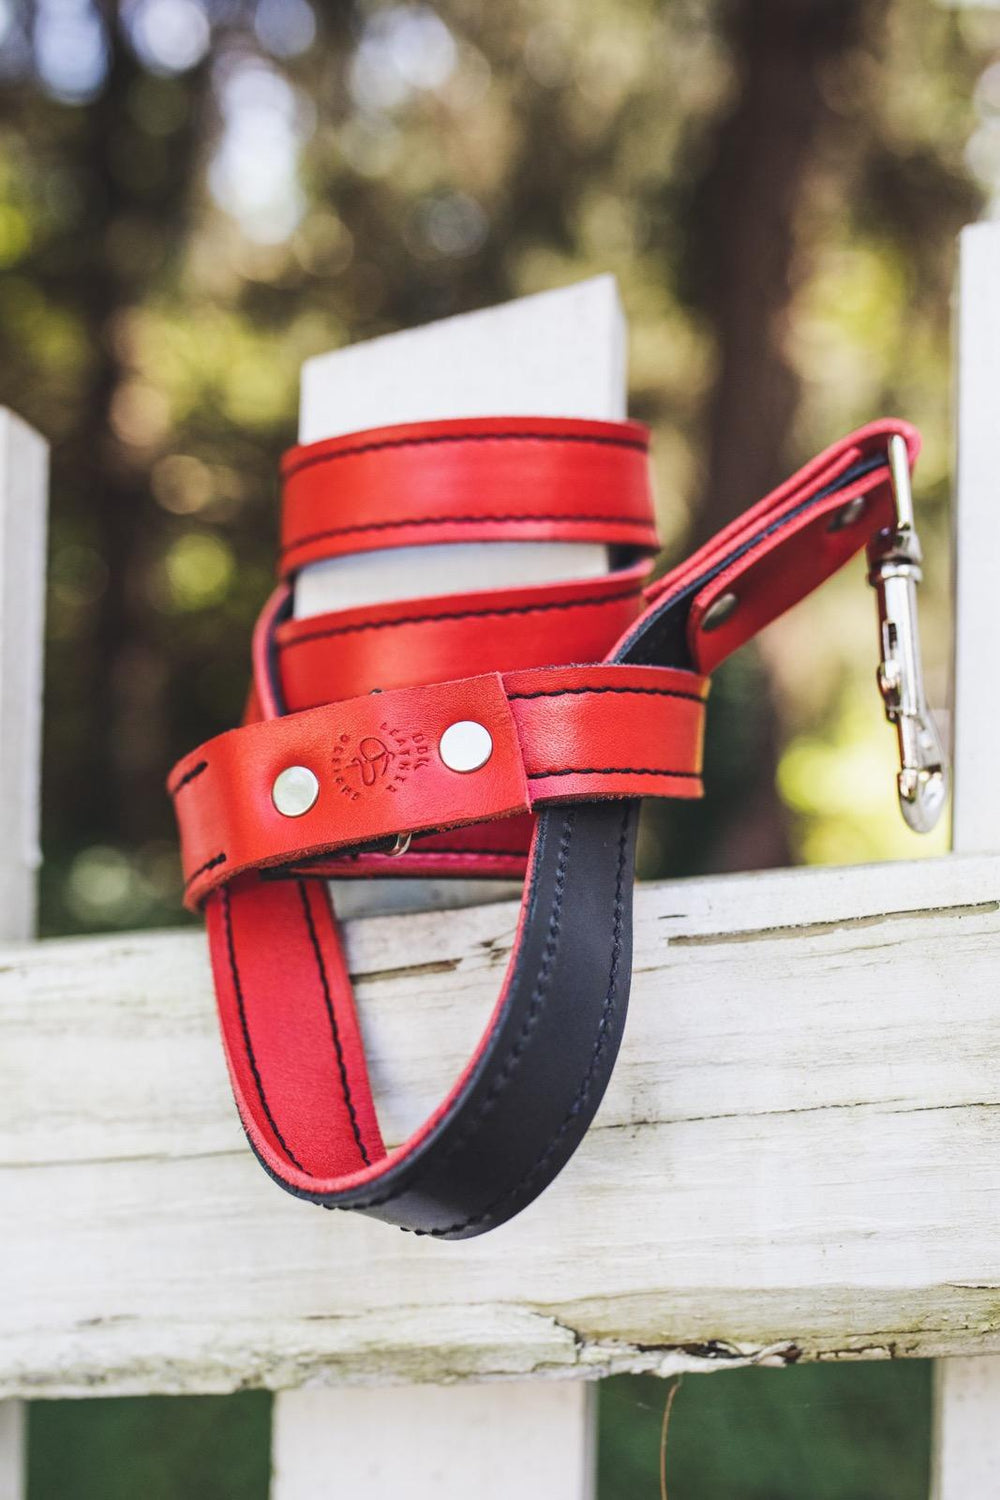 handmade Scarlet & Gray leather dog Leash bbk image by Whitney Brewer Photography